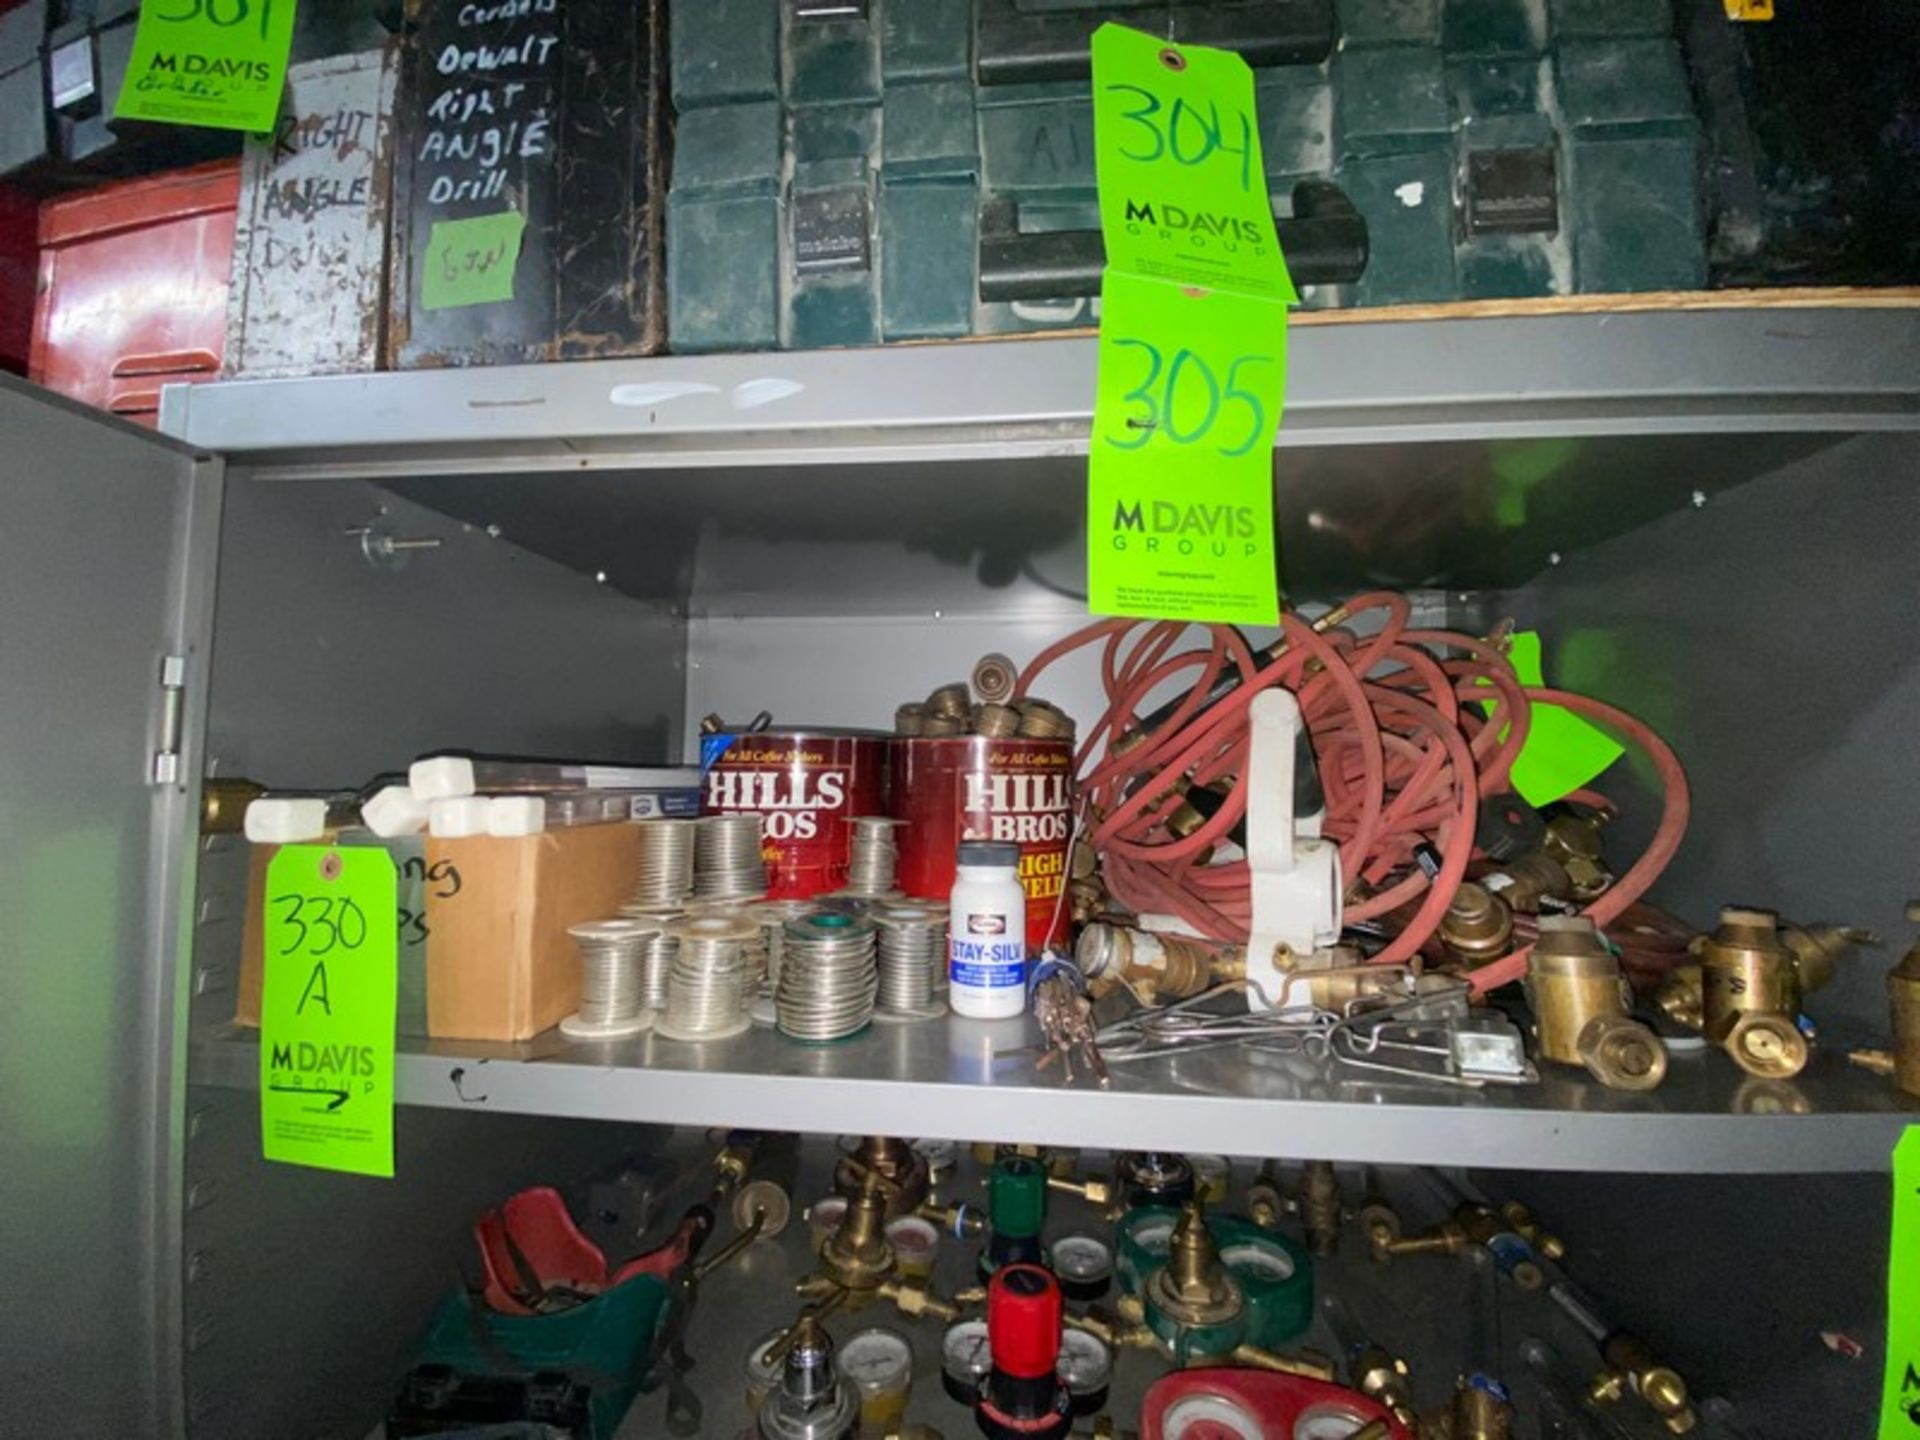 Lot of Assorted Soldering Material & Welding Rods, & Other Contents of Shelf--See Photographs (